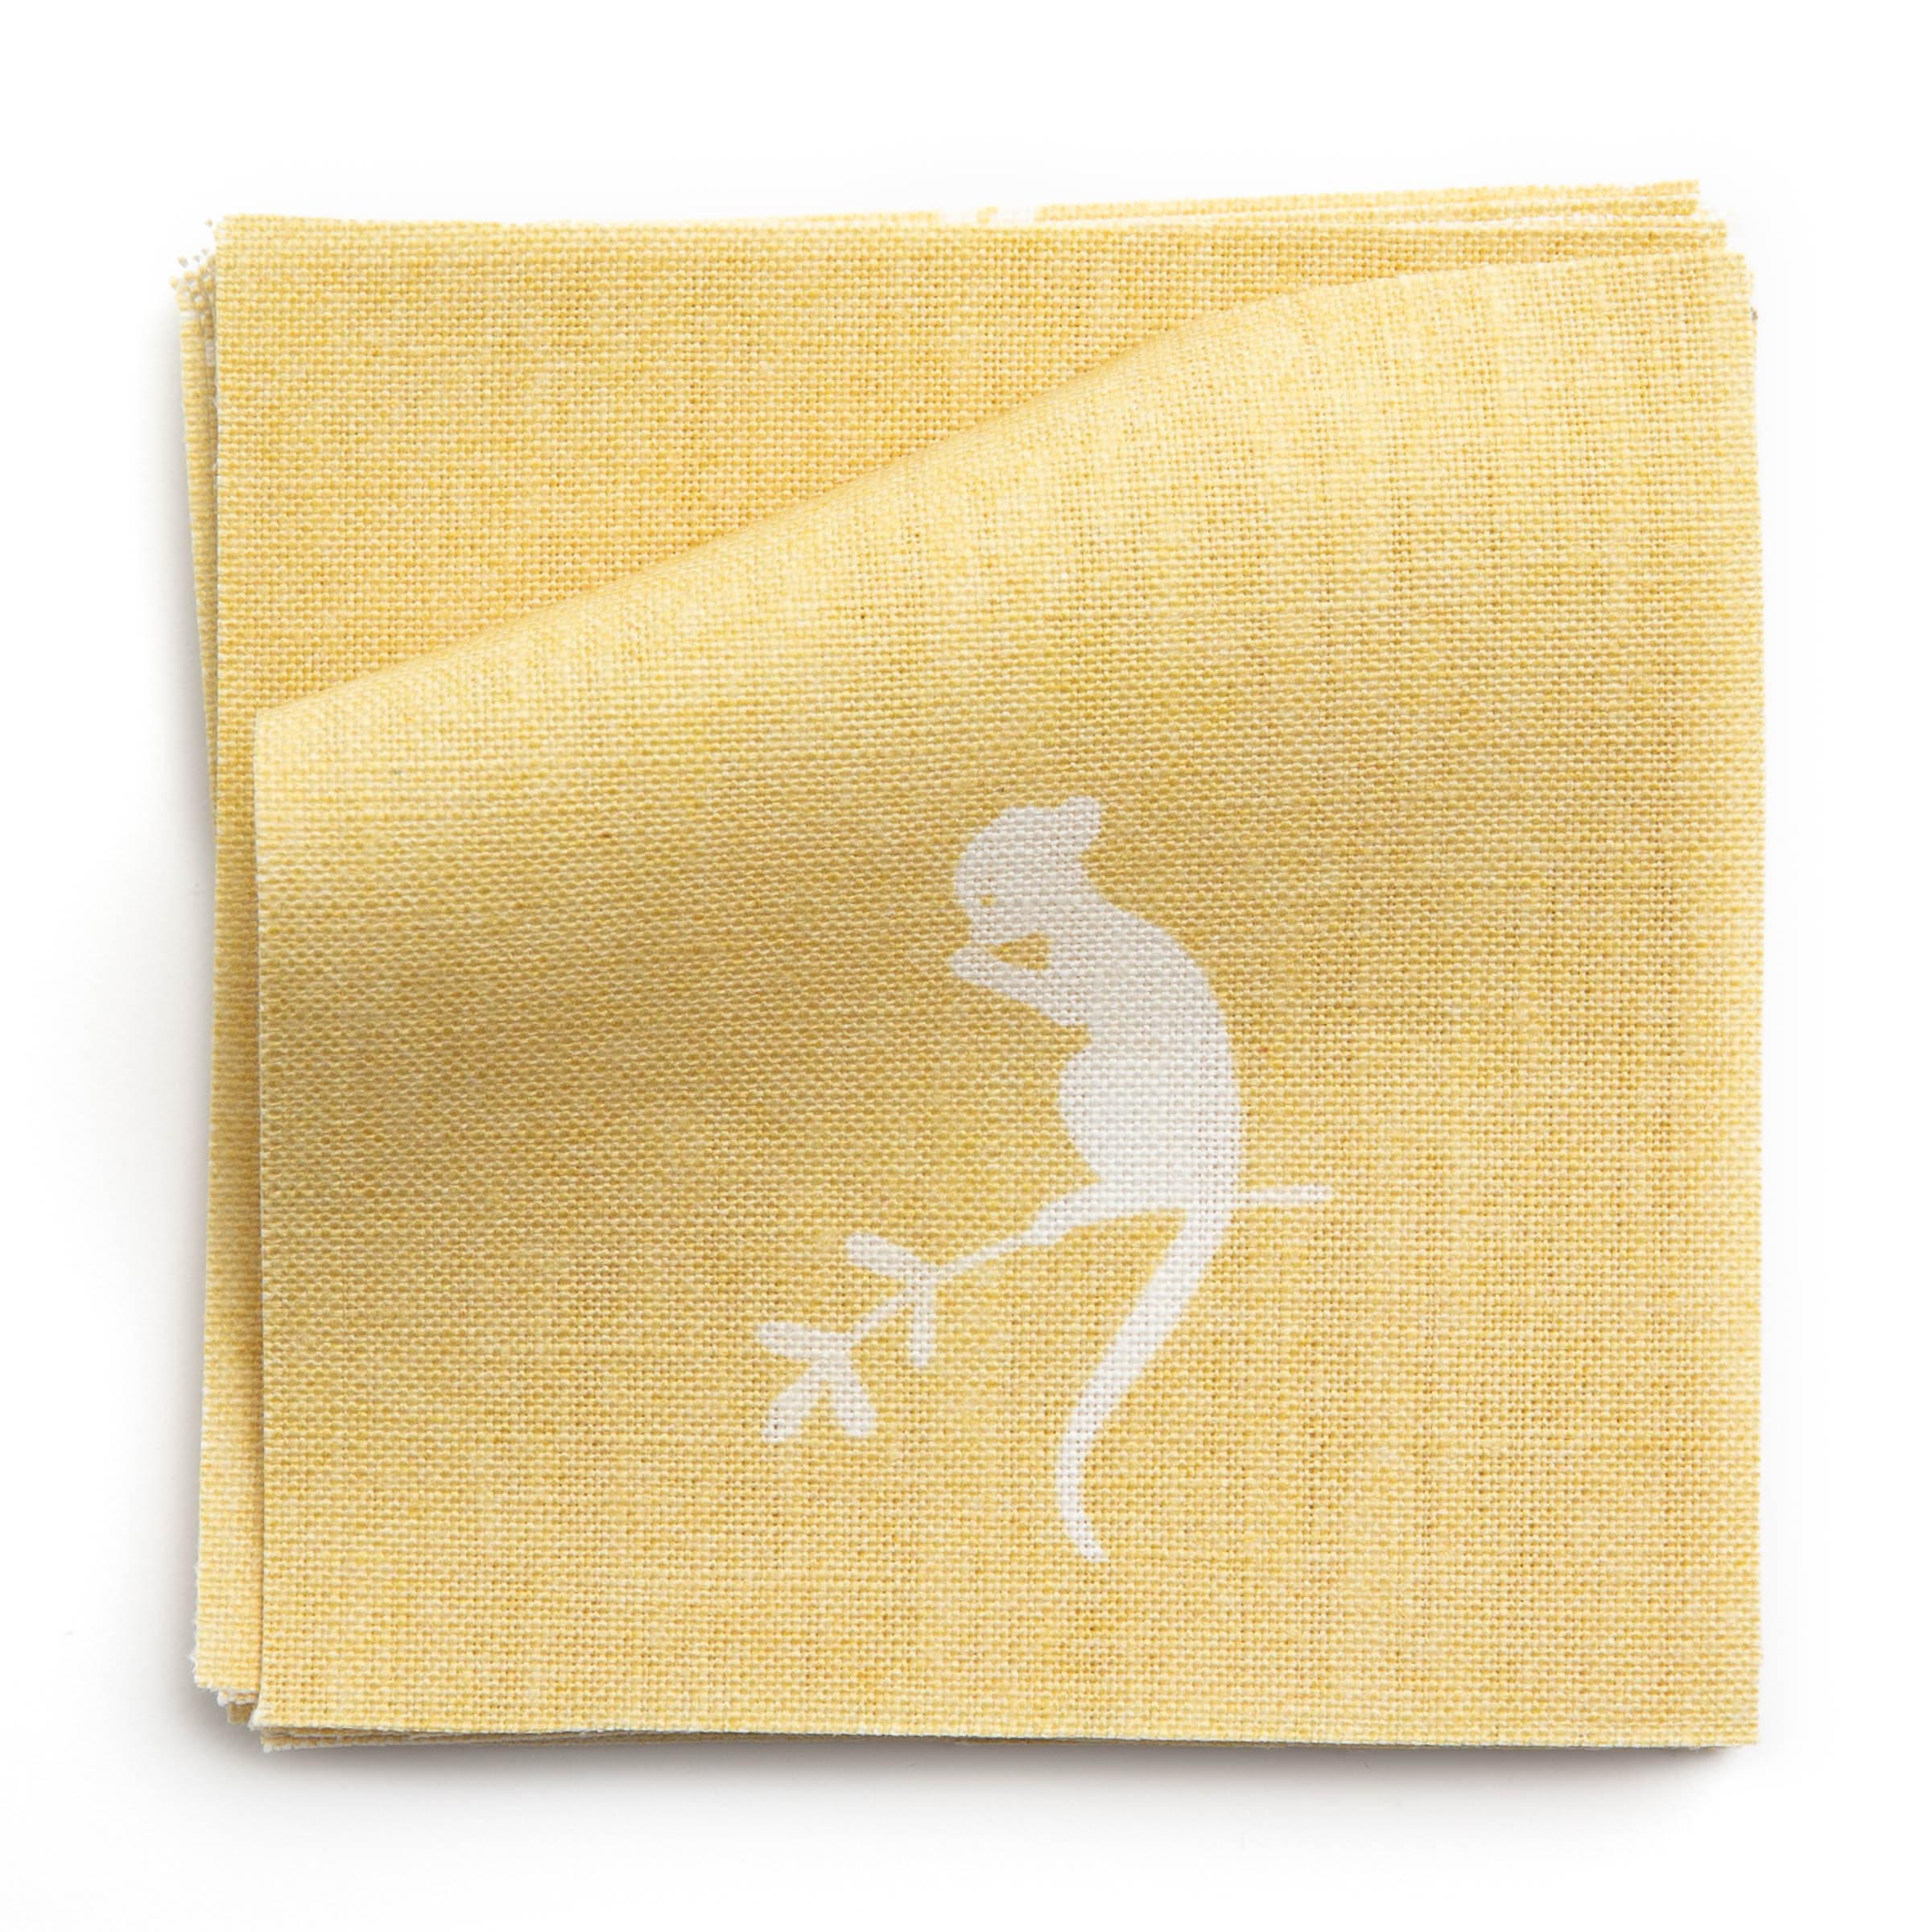 A stack of fabric swatches in a playful animal and branch print in white on a yellow field.